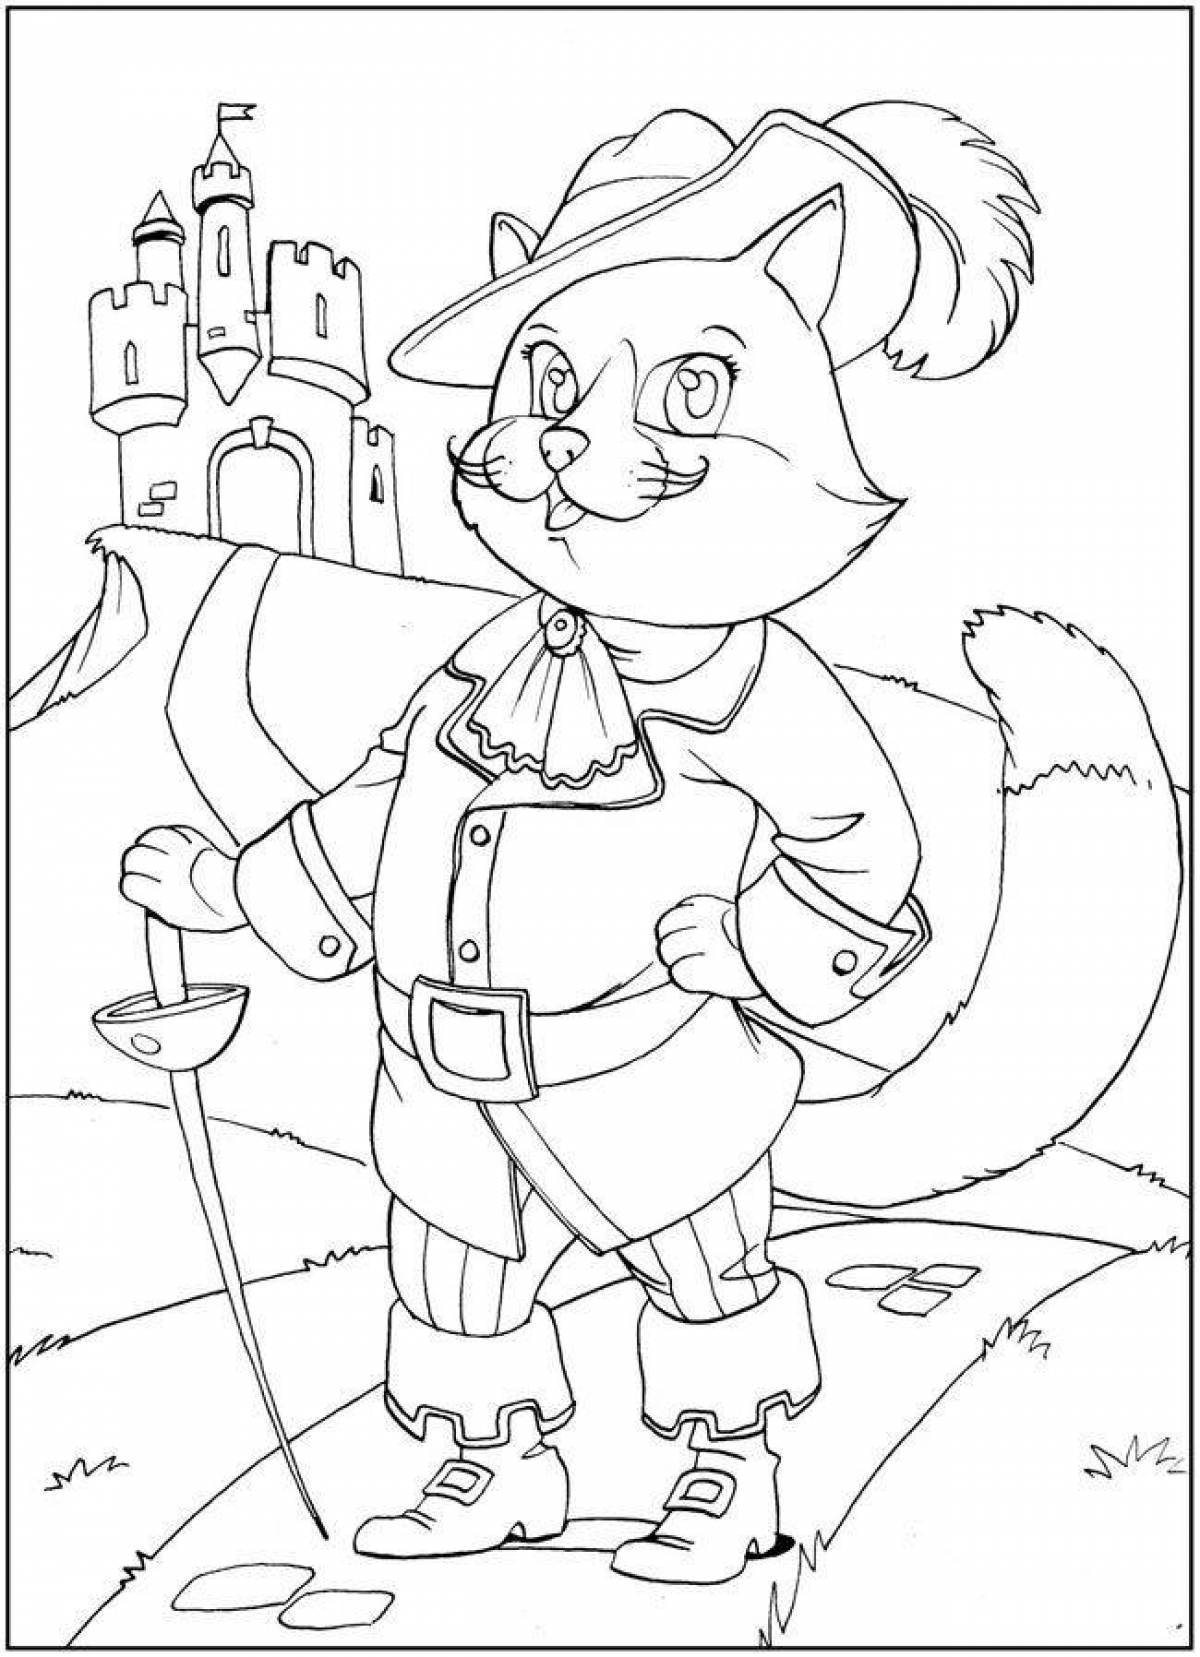 Amazing coloring pages of Charles Perrault's fairy tales